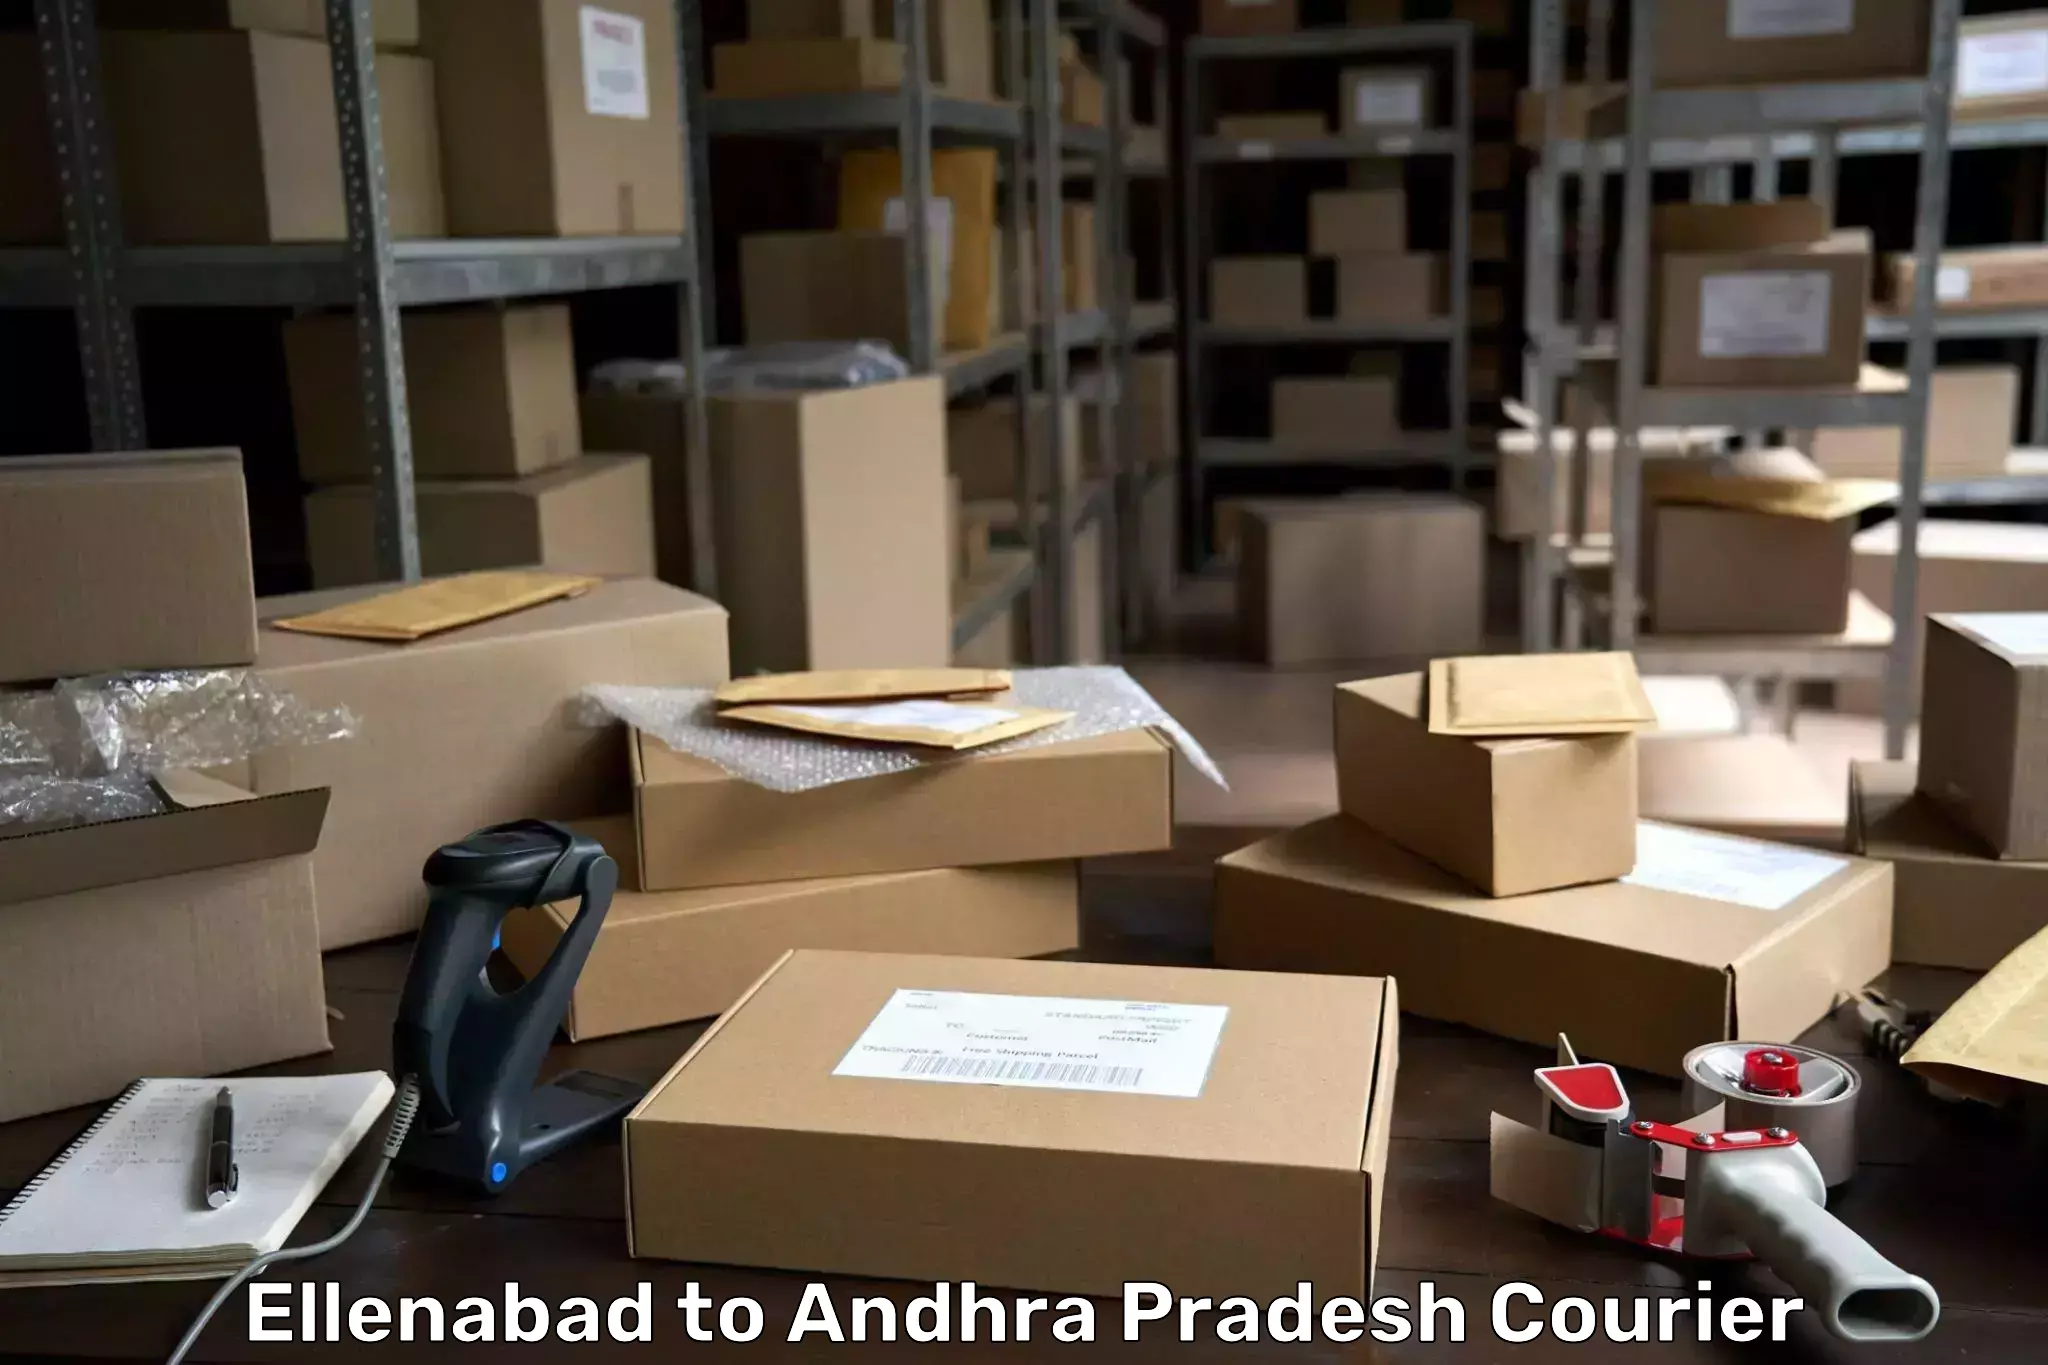 State-of-the-art courier technology Ellenabad to Jaggayyapet